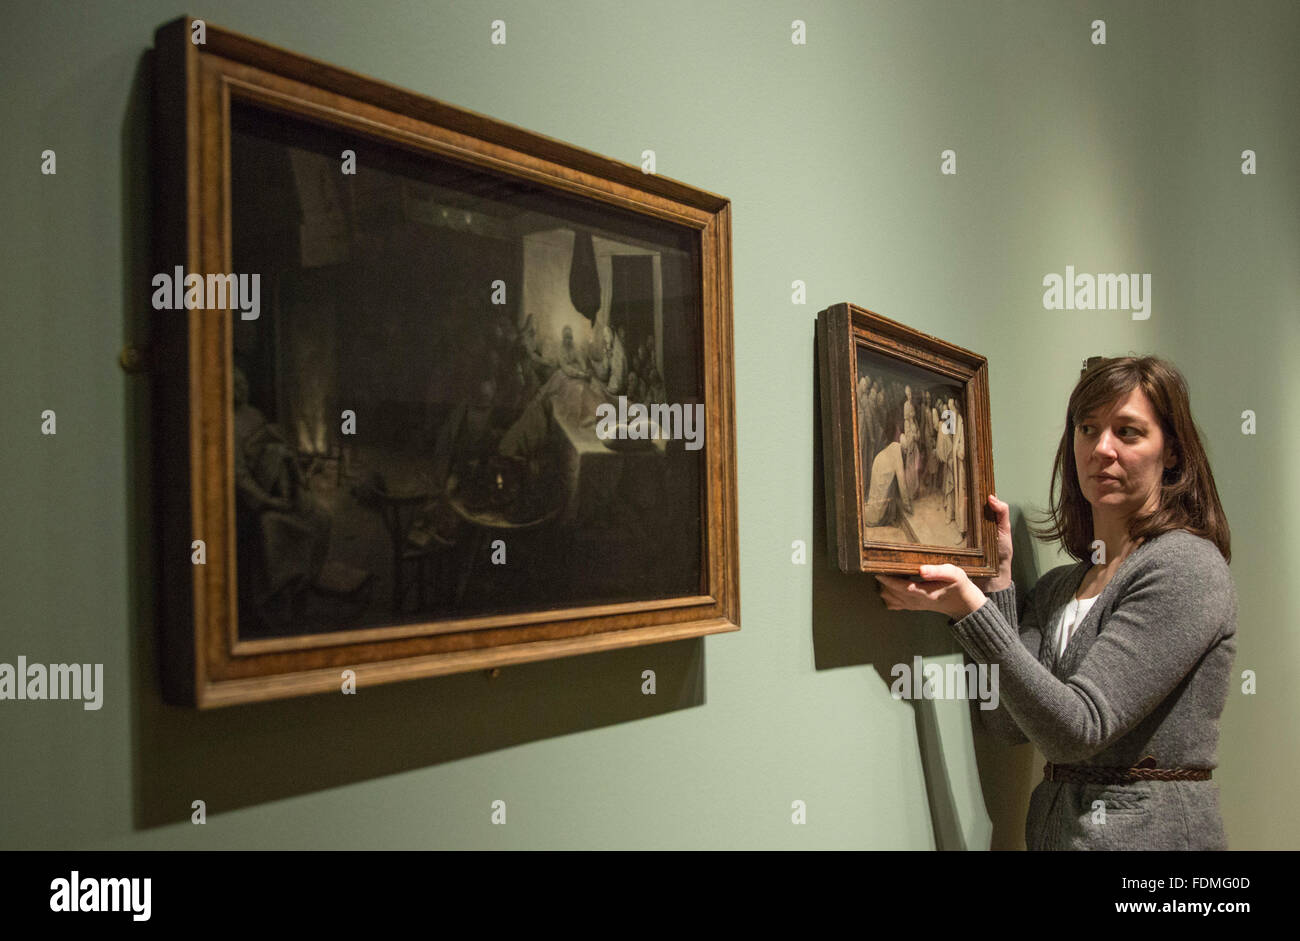 London, UK. 1 February 2016. A Courtauld Gallery employee holds the Bruegel painting Christ and the Woman Taken in Adultery, 1565. Bruegel in Black and White: Three Grisailles Reunited at The Courtauld Gallery. From 4 February to 8 May 2016 Pieter Bruegel the Elder’s three surviving grisaille paintings will be shown together for the first time at The Courtauld Gallery. The three panels will be accompanied by comparative prints and contemporary replicas, alongside other independent grisailles to examine their legacy and the development of this genre in Northern Europe. Stock Photo